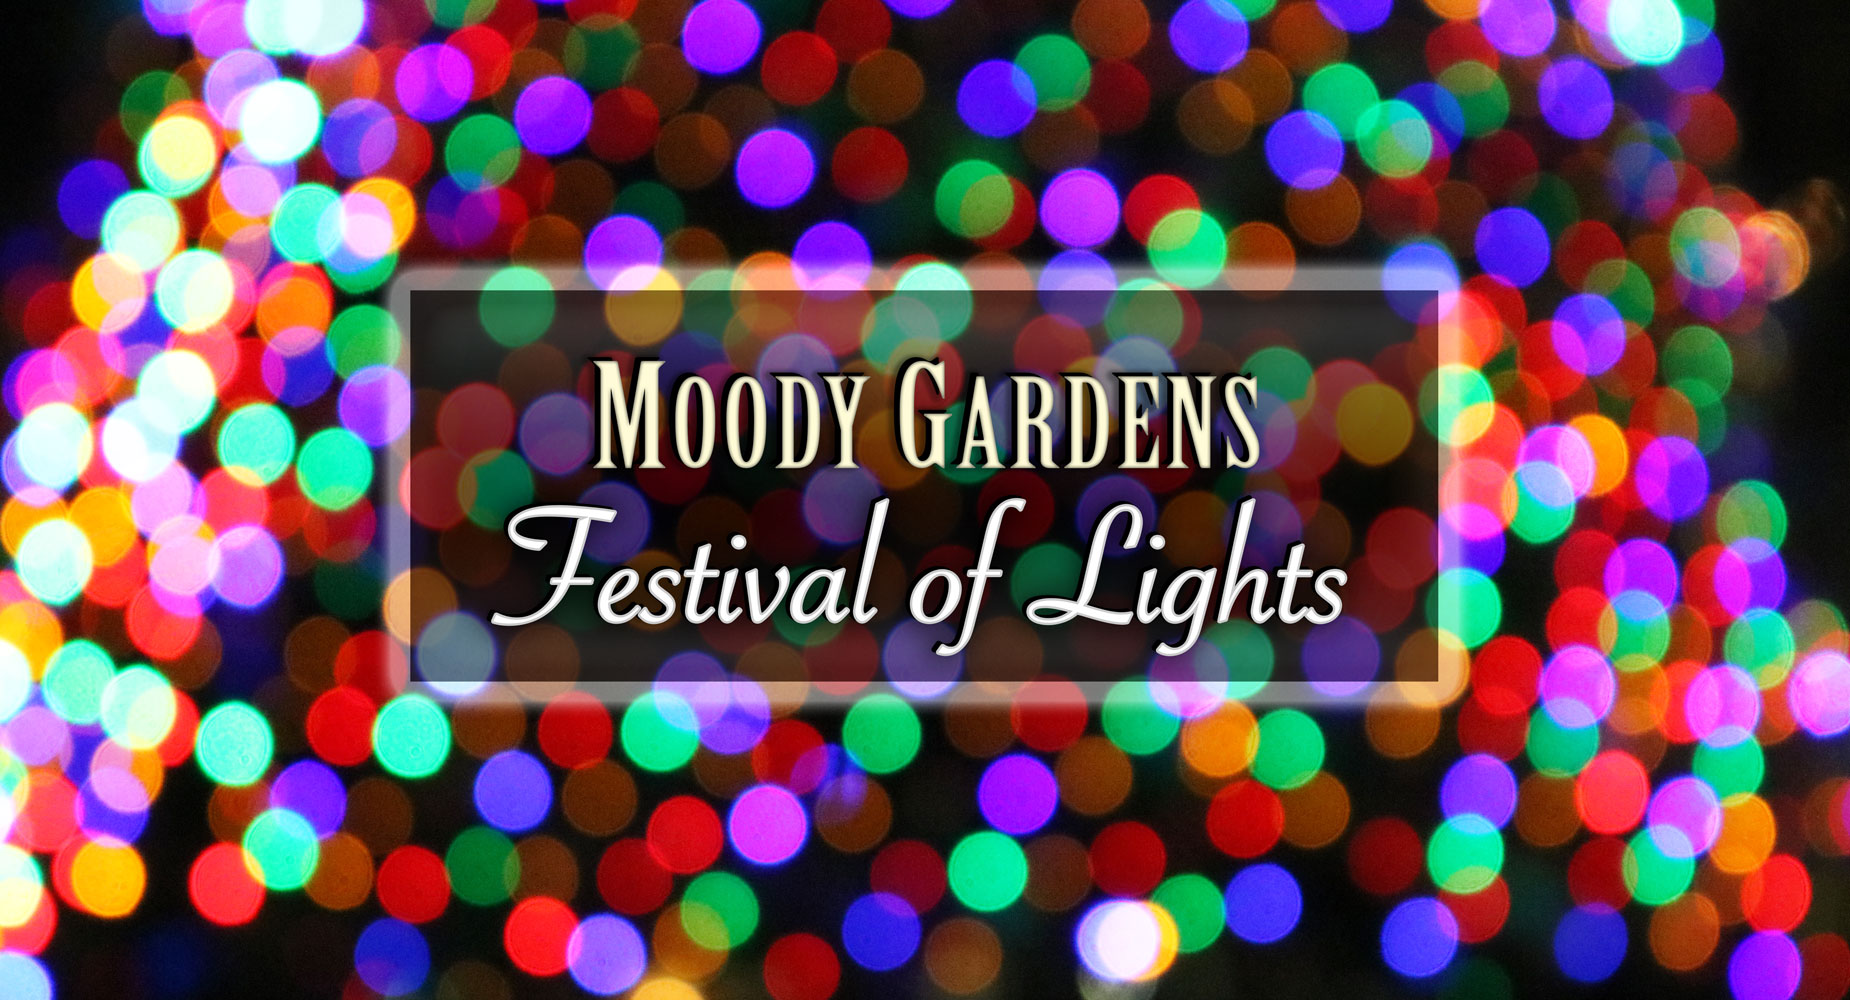 GRAPHIC: Blurred Christmas lights with text "Moody Gardens Festival of Lights." Graphic by Signal reporter Emily Dundee.